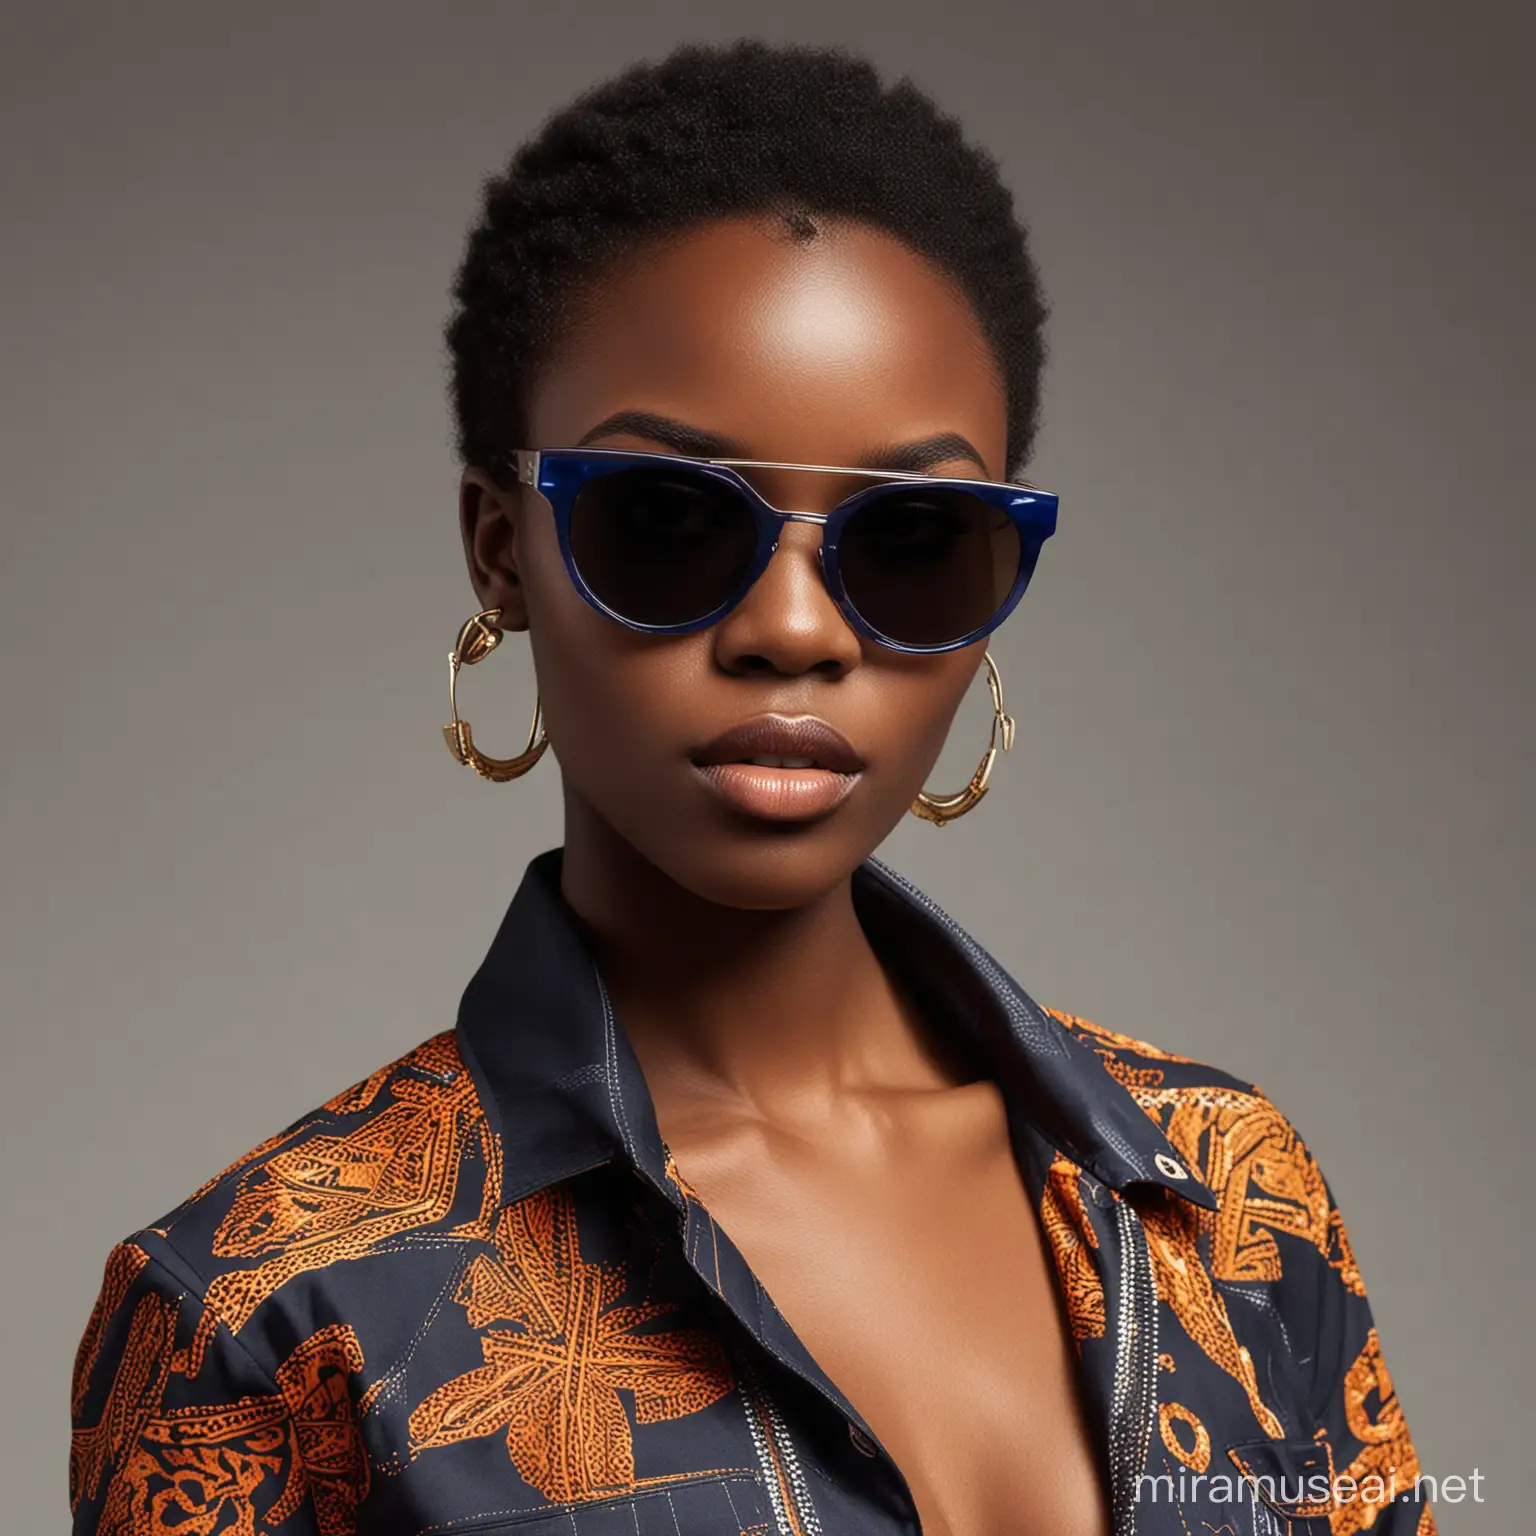 African Model in Trendy Sunglasses Exuding Confidence